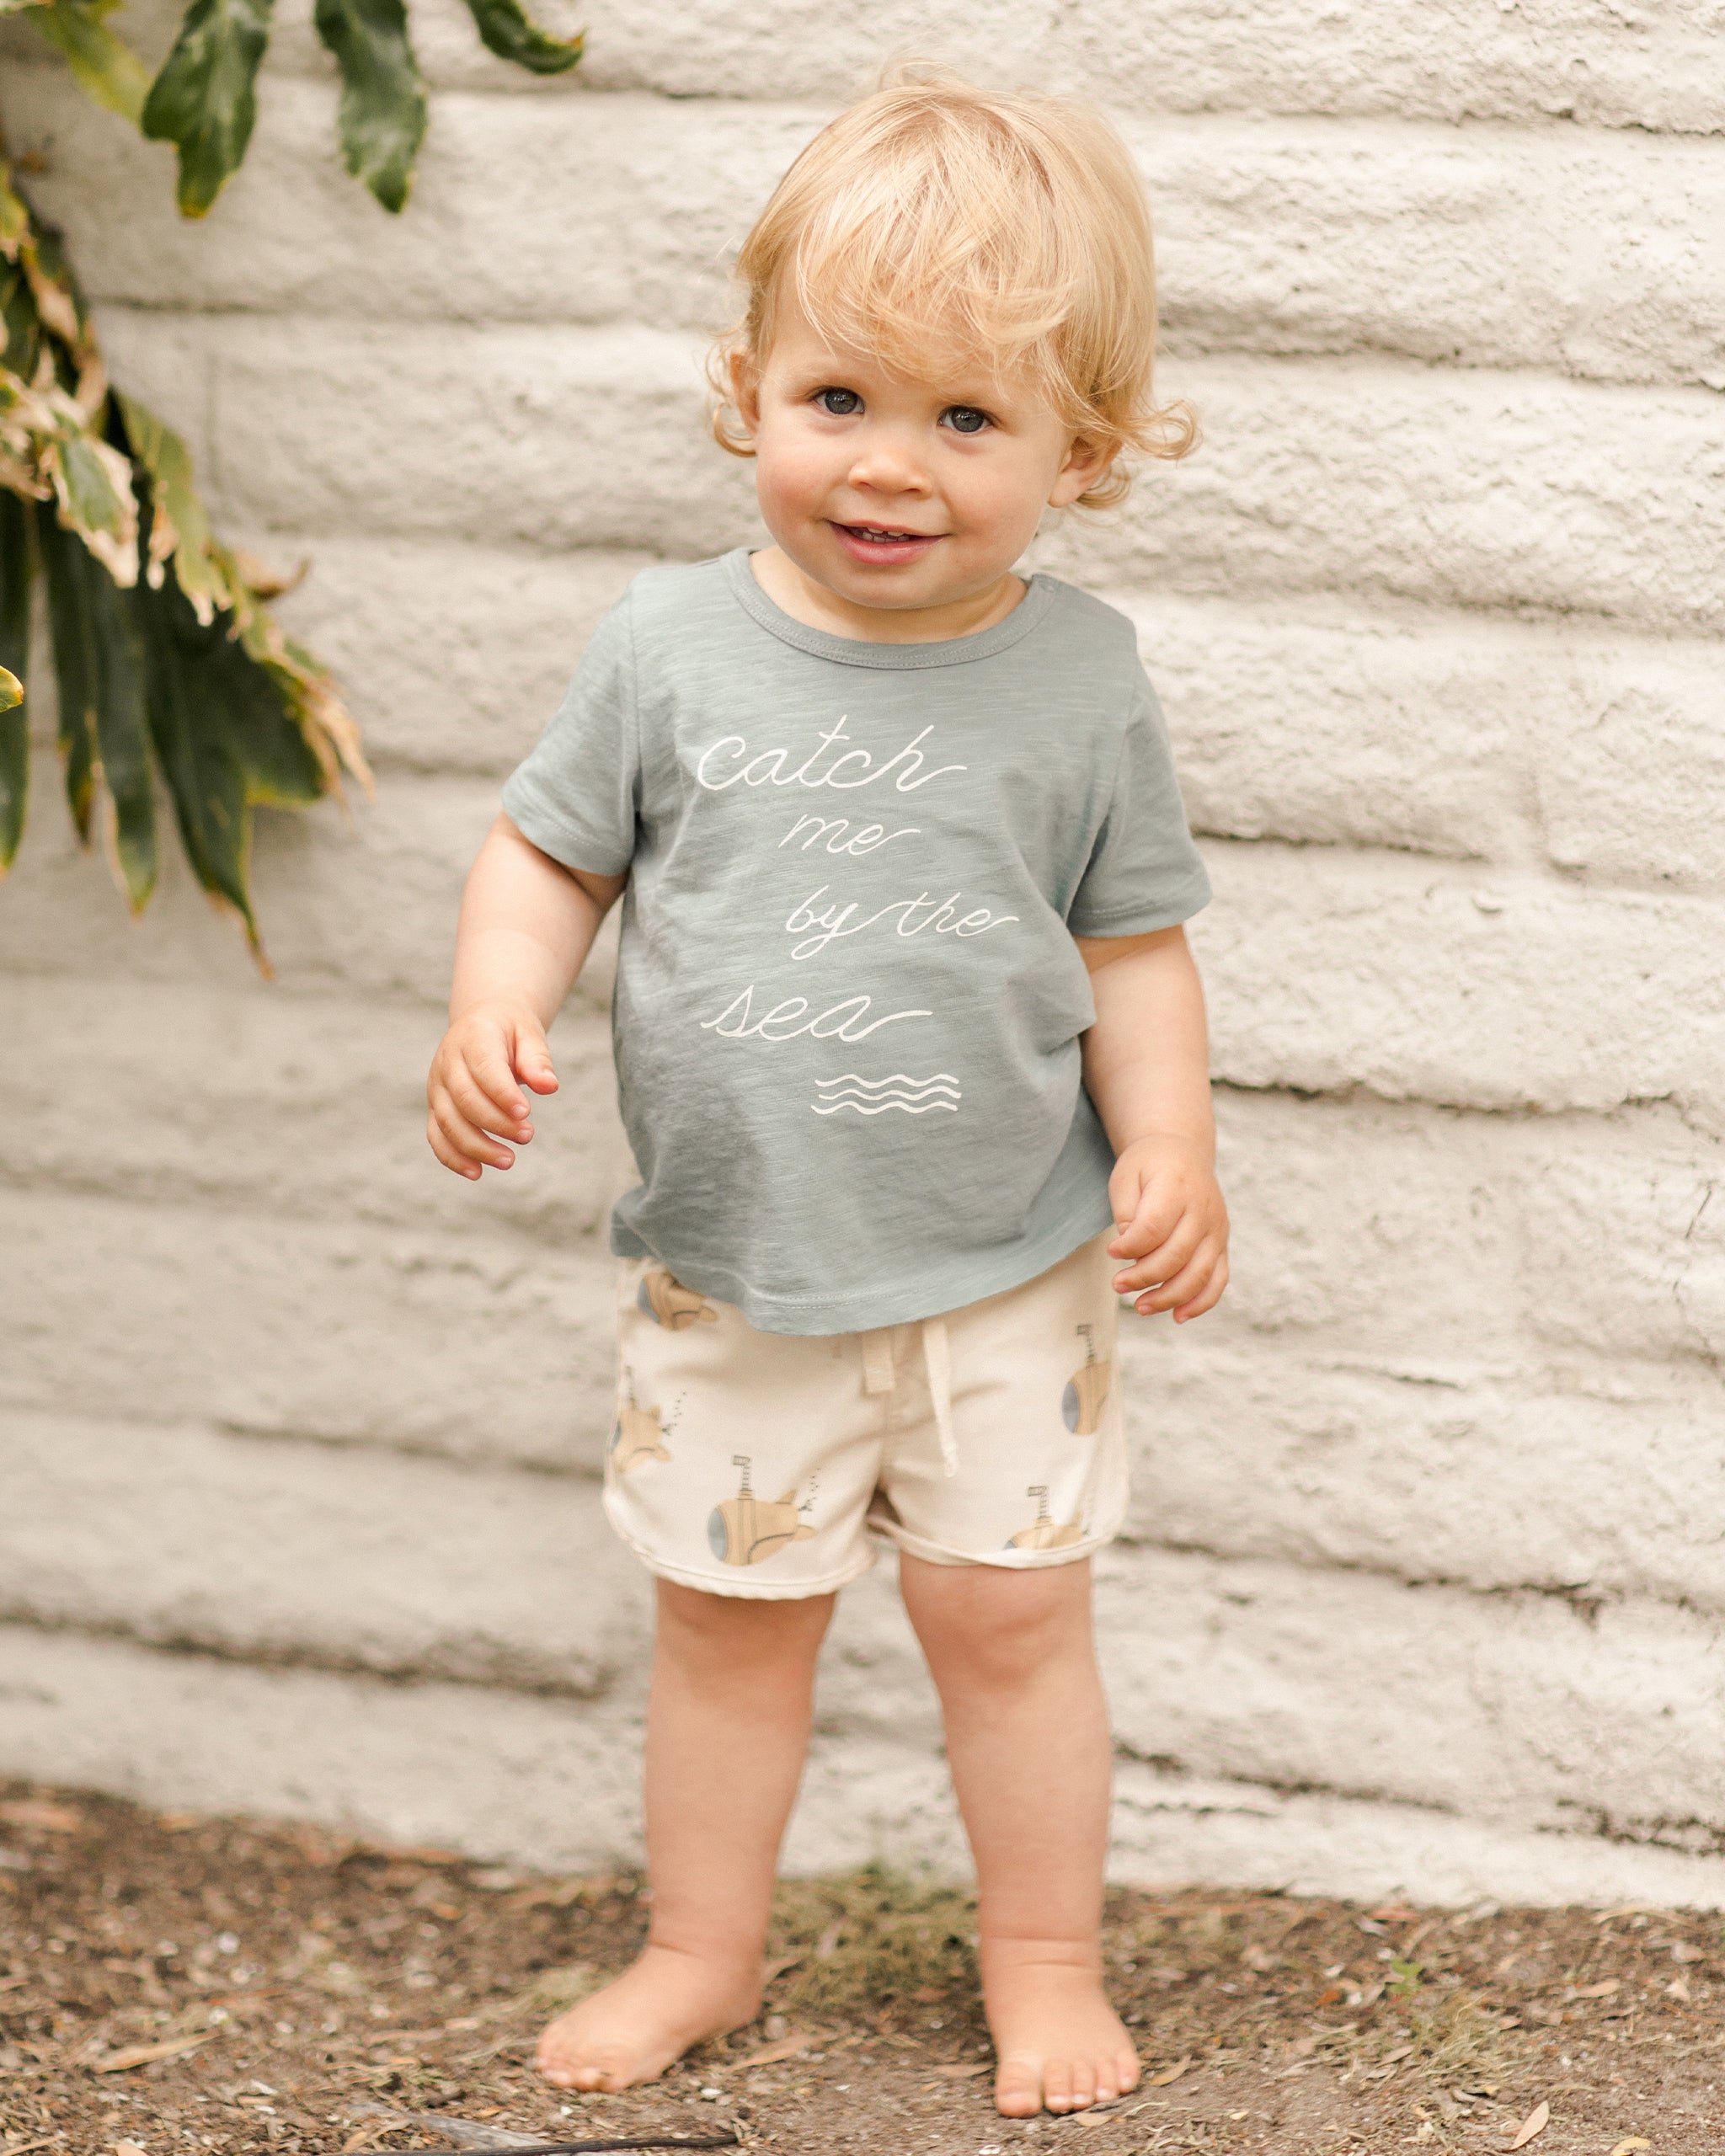 Basic Tee || Catch Me By The Sea - Rylee + Cru | Kids Clothes | Trendy Baby Clothes | Modern Infant Outfits |